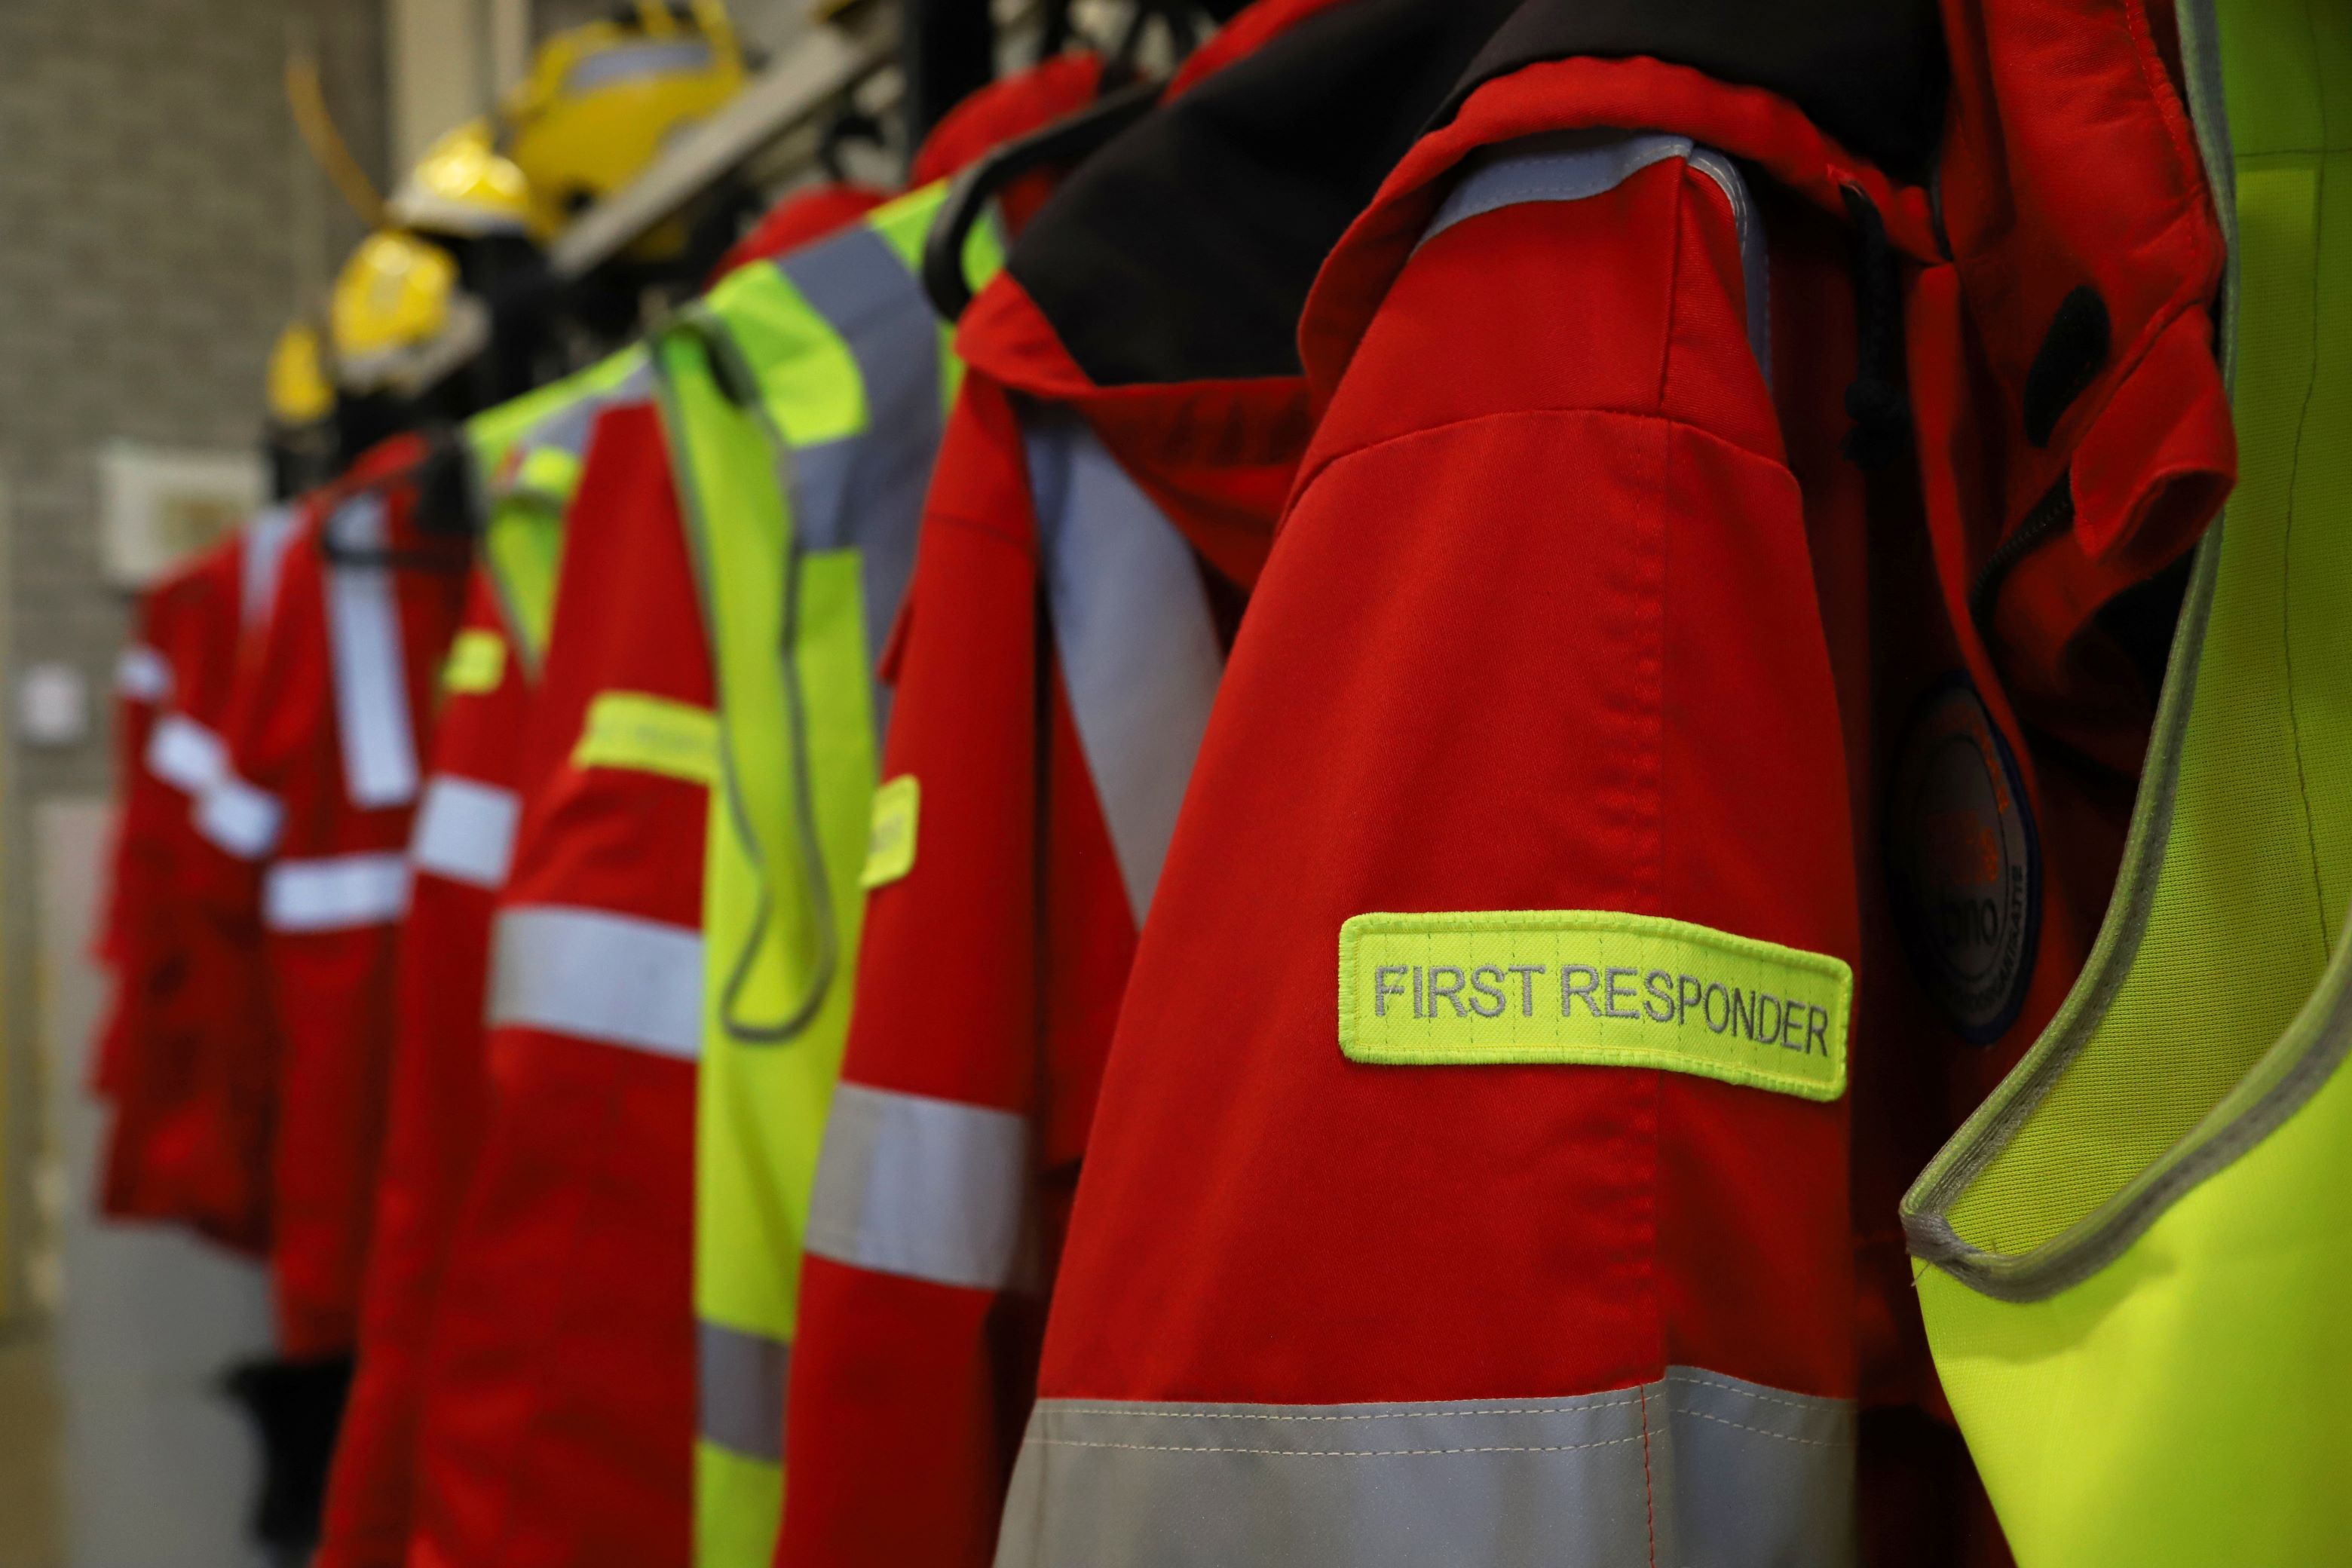 red and yellow first responder uniforms hanging up